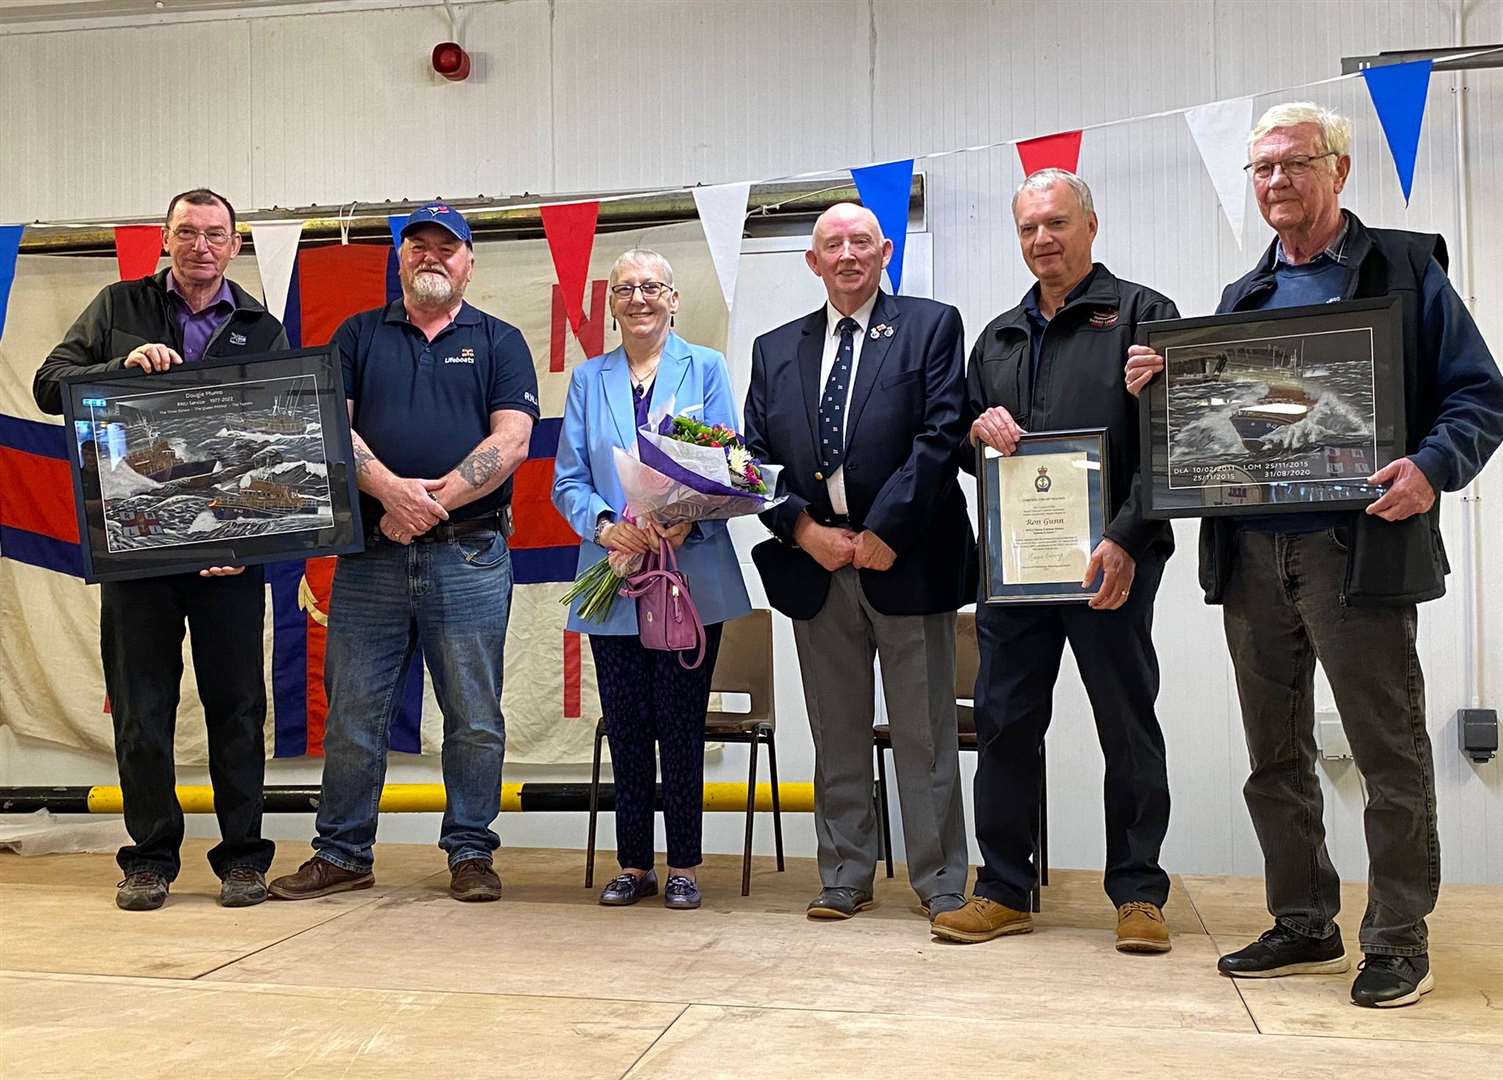 Sandy Gordon (third from right), who opened the Thurso Lifeboat Summer Fayre, with his wife Isobel and (from left) former coxswain Dougie Munro, current coxswain Gordon Munro, Ron Gunn and Jackie Robertson.